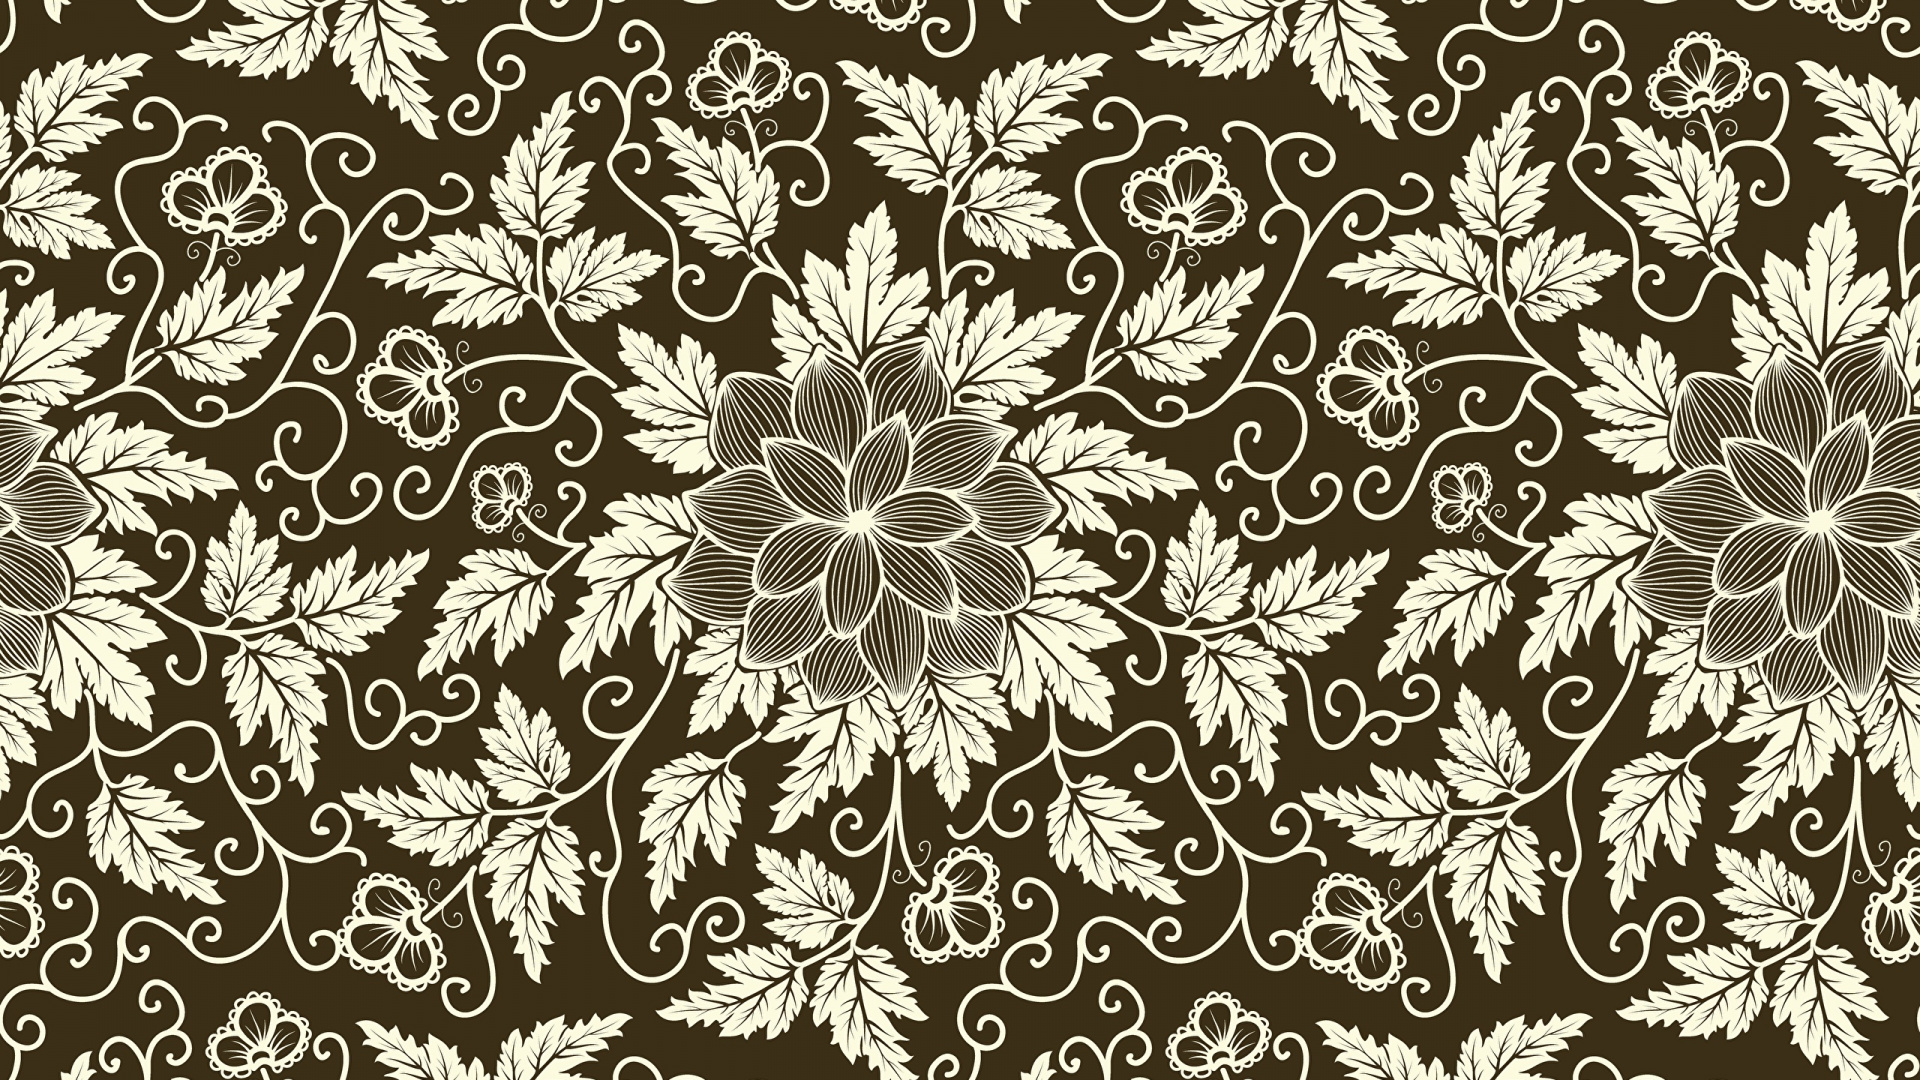 Black and White Floral Textile. Wallpaper in 1920x1080 Resolution